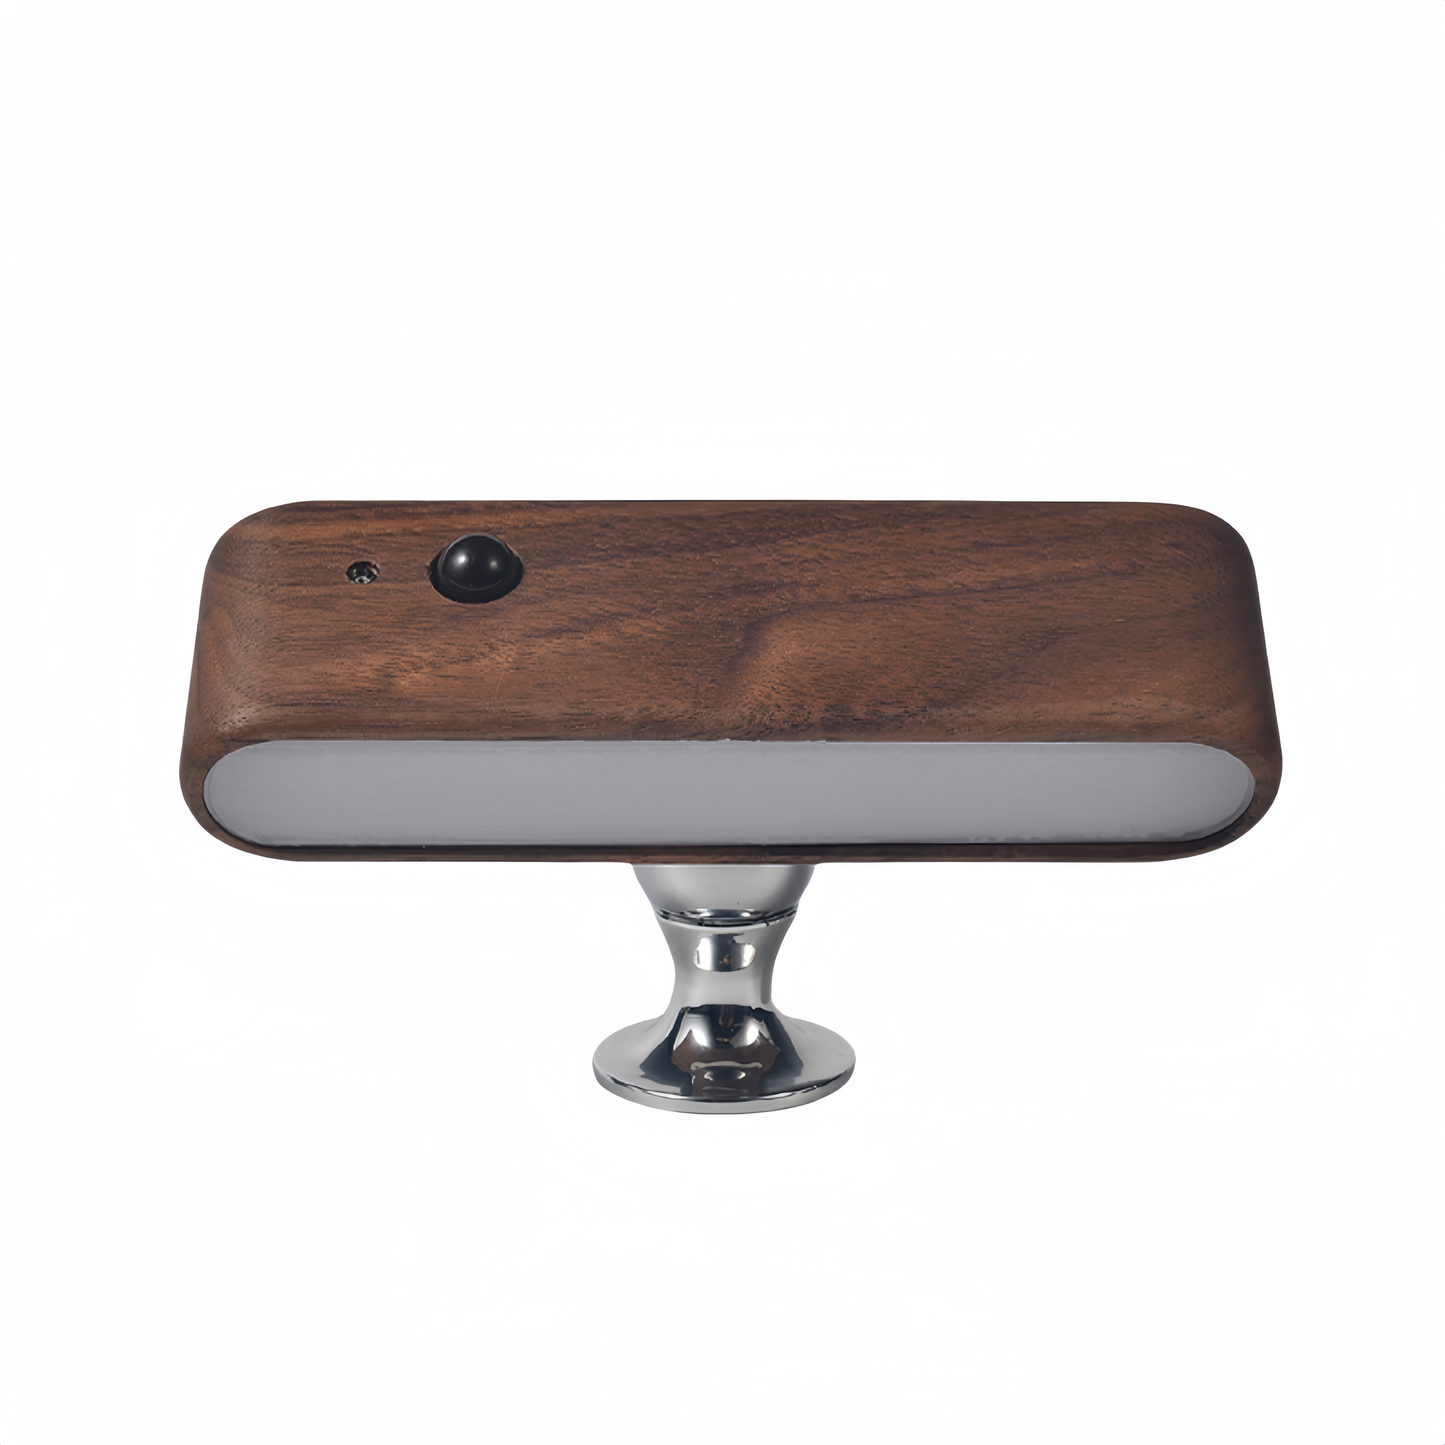 Wall-mounted, hole-free walnut solid wood small vase and motion sensor light